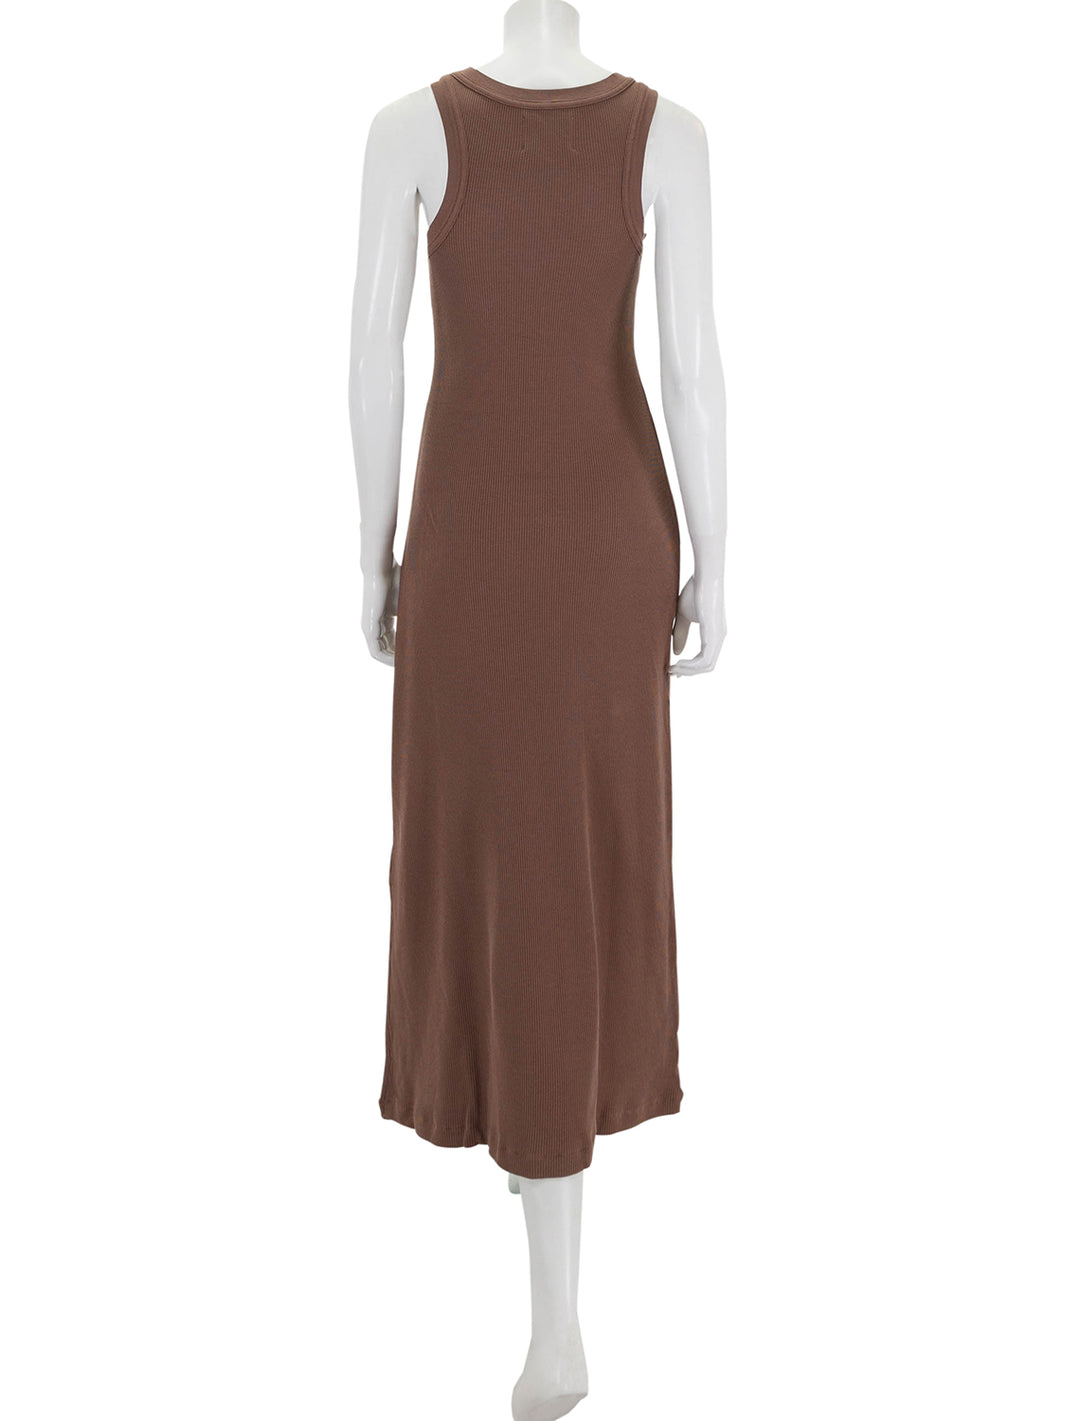 Back view of Citizens of Humanity's isabel tank dress in mink.